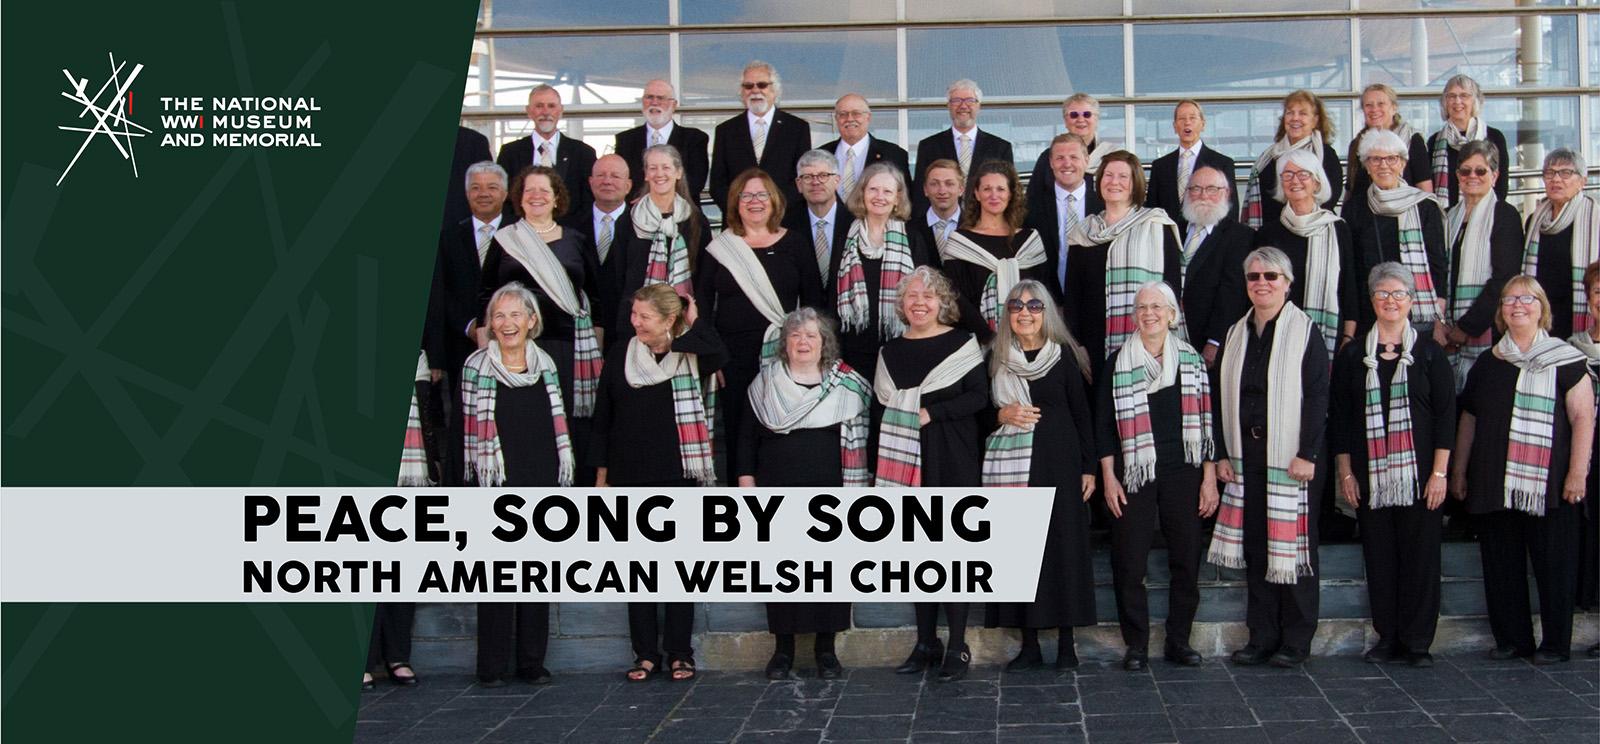 Image: Three rows of men and women standing on choir risers, dressed in black with red/white/green scarves or ties. Text: 'Peace, Song by Song / North American Welsh Choir'